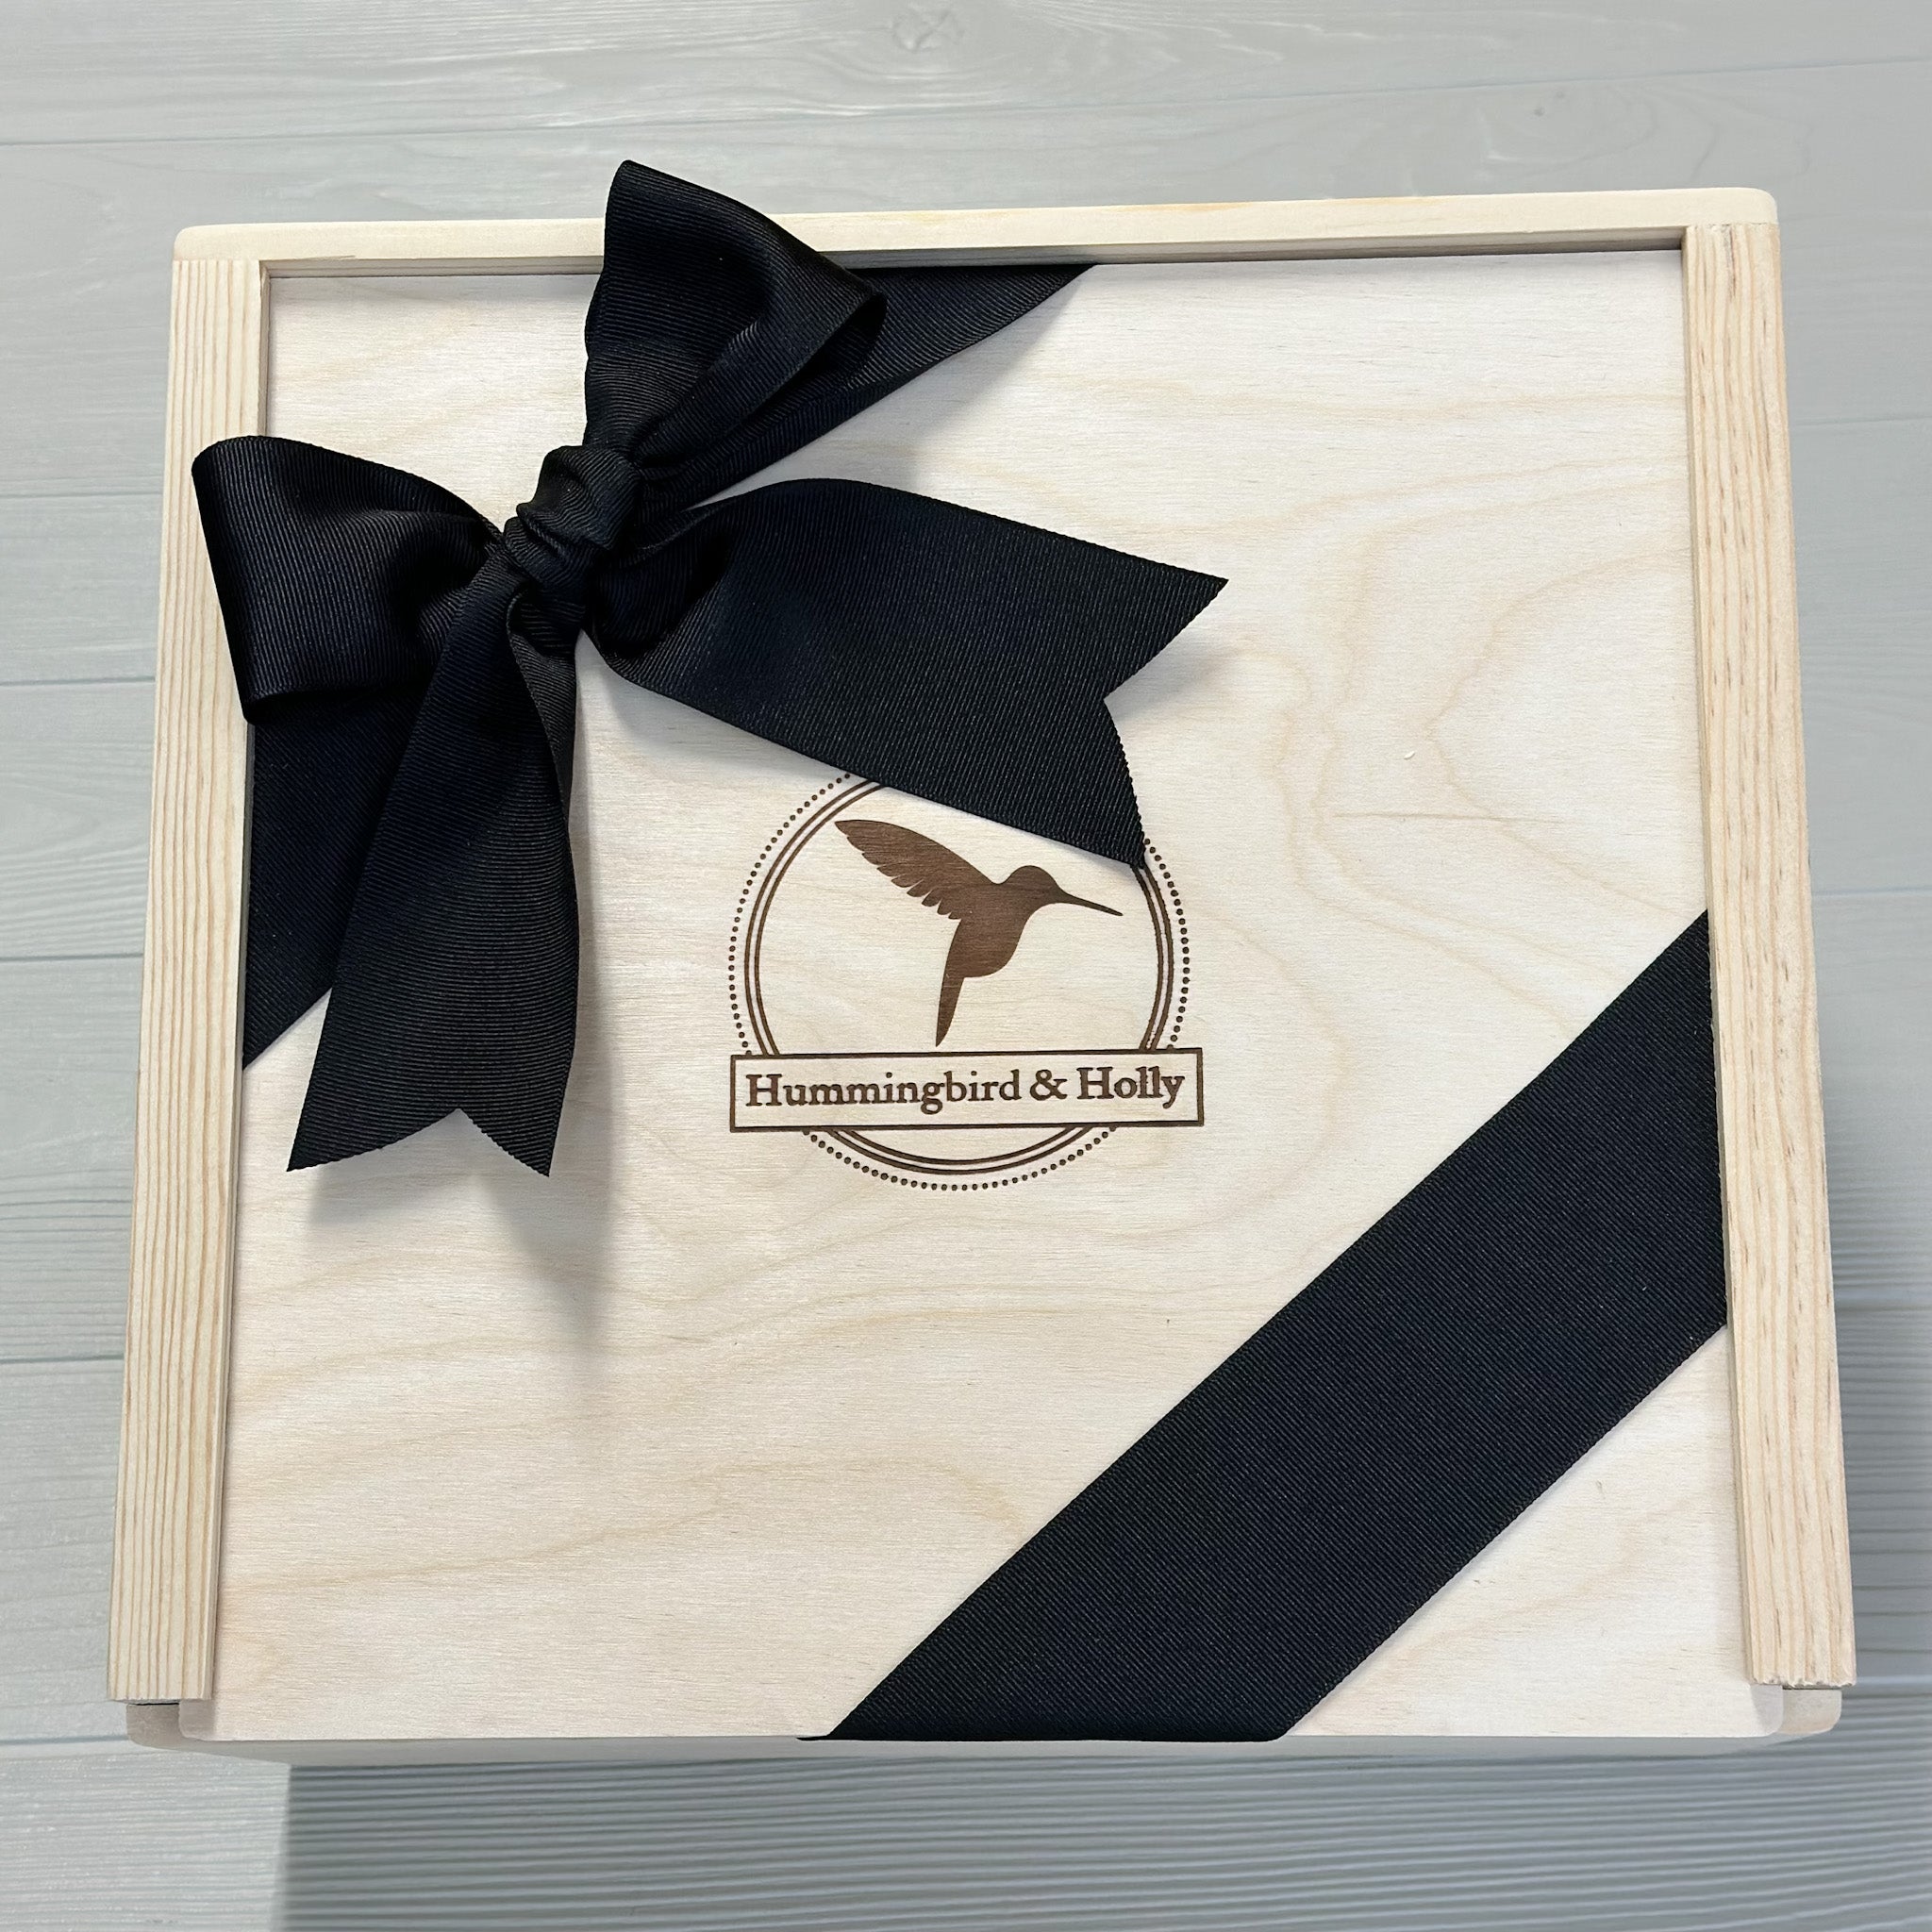 close up of our locally made wooden slide lid gift box included in our celebrate gift basket